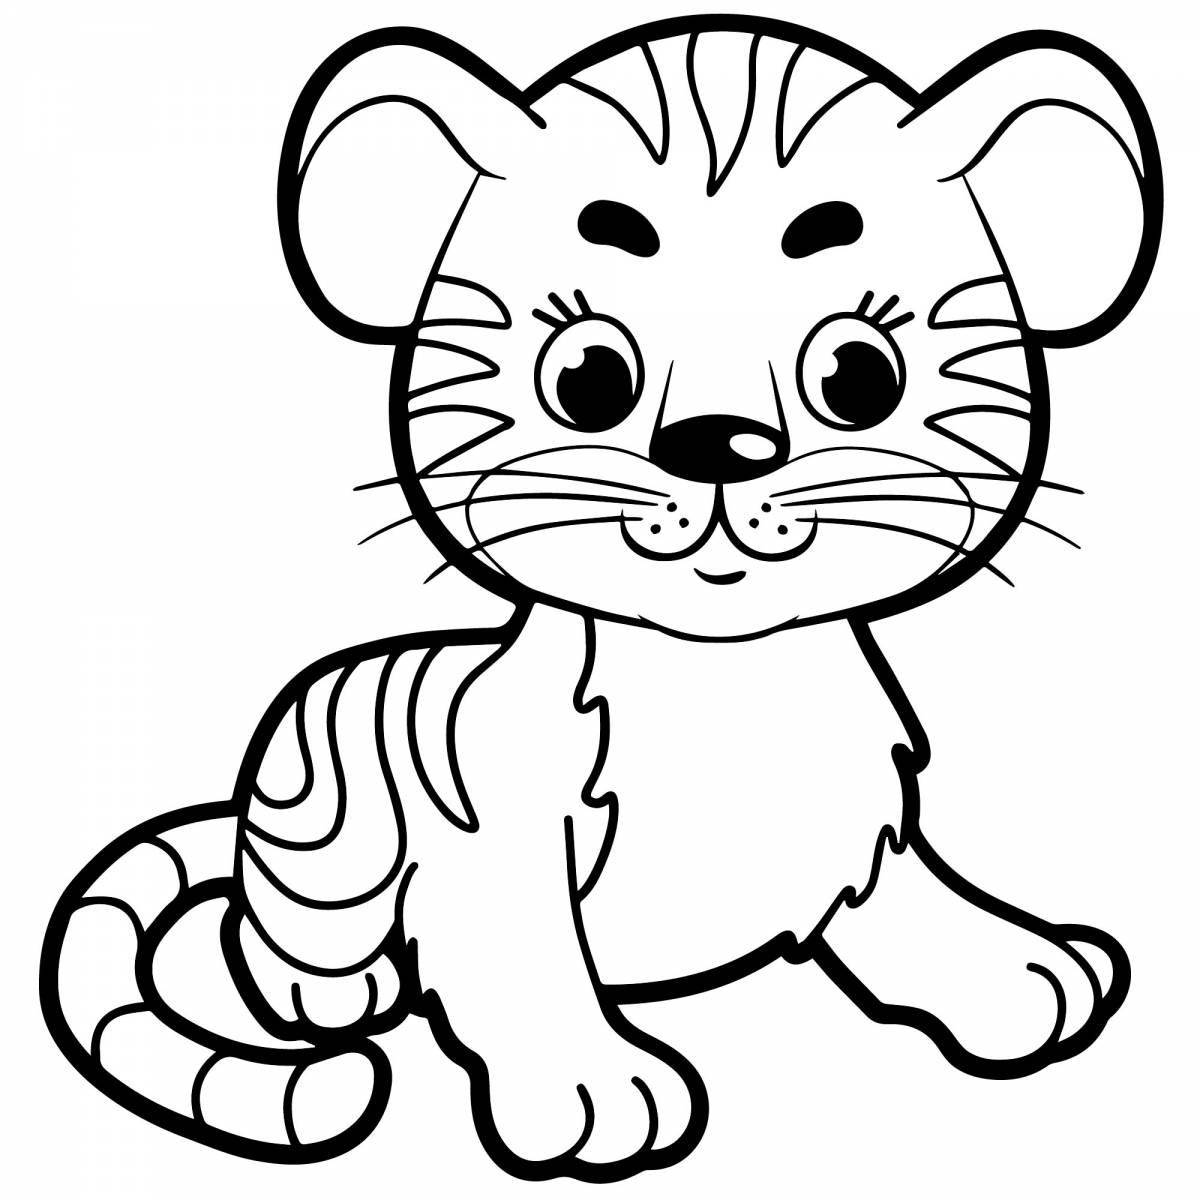 Playful tiger cub coloring page for girls